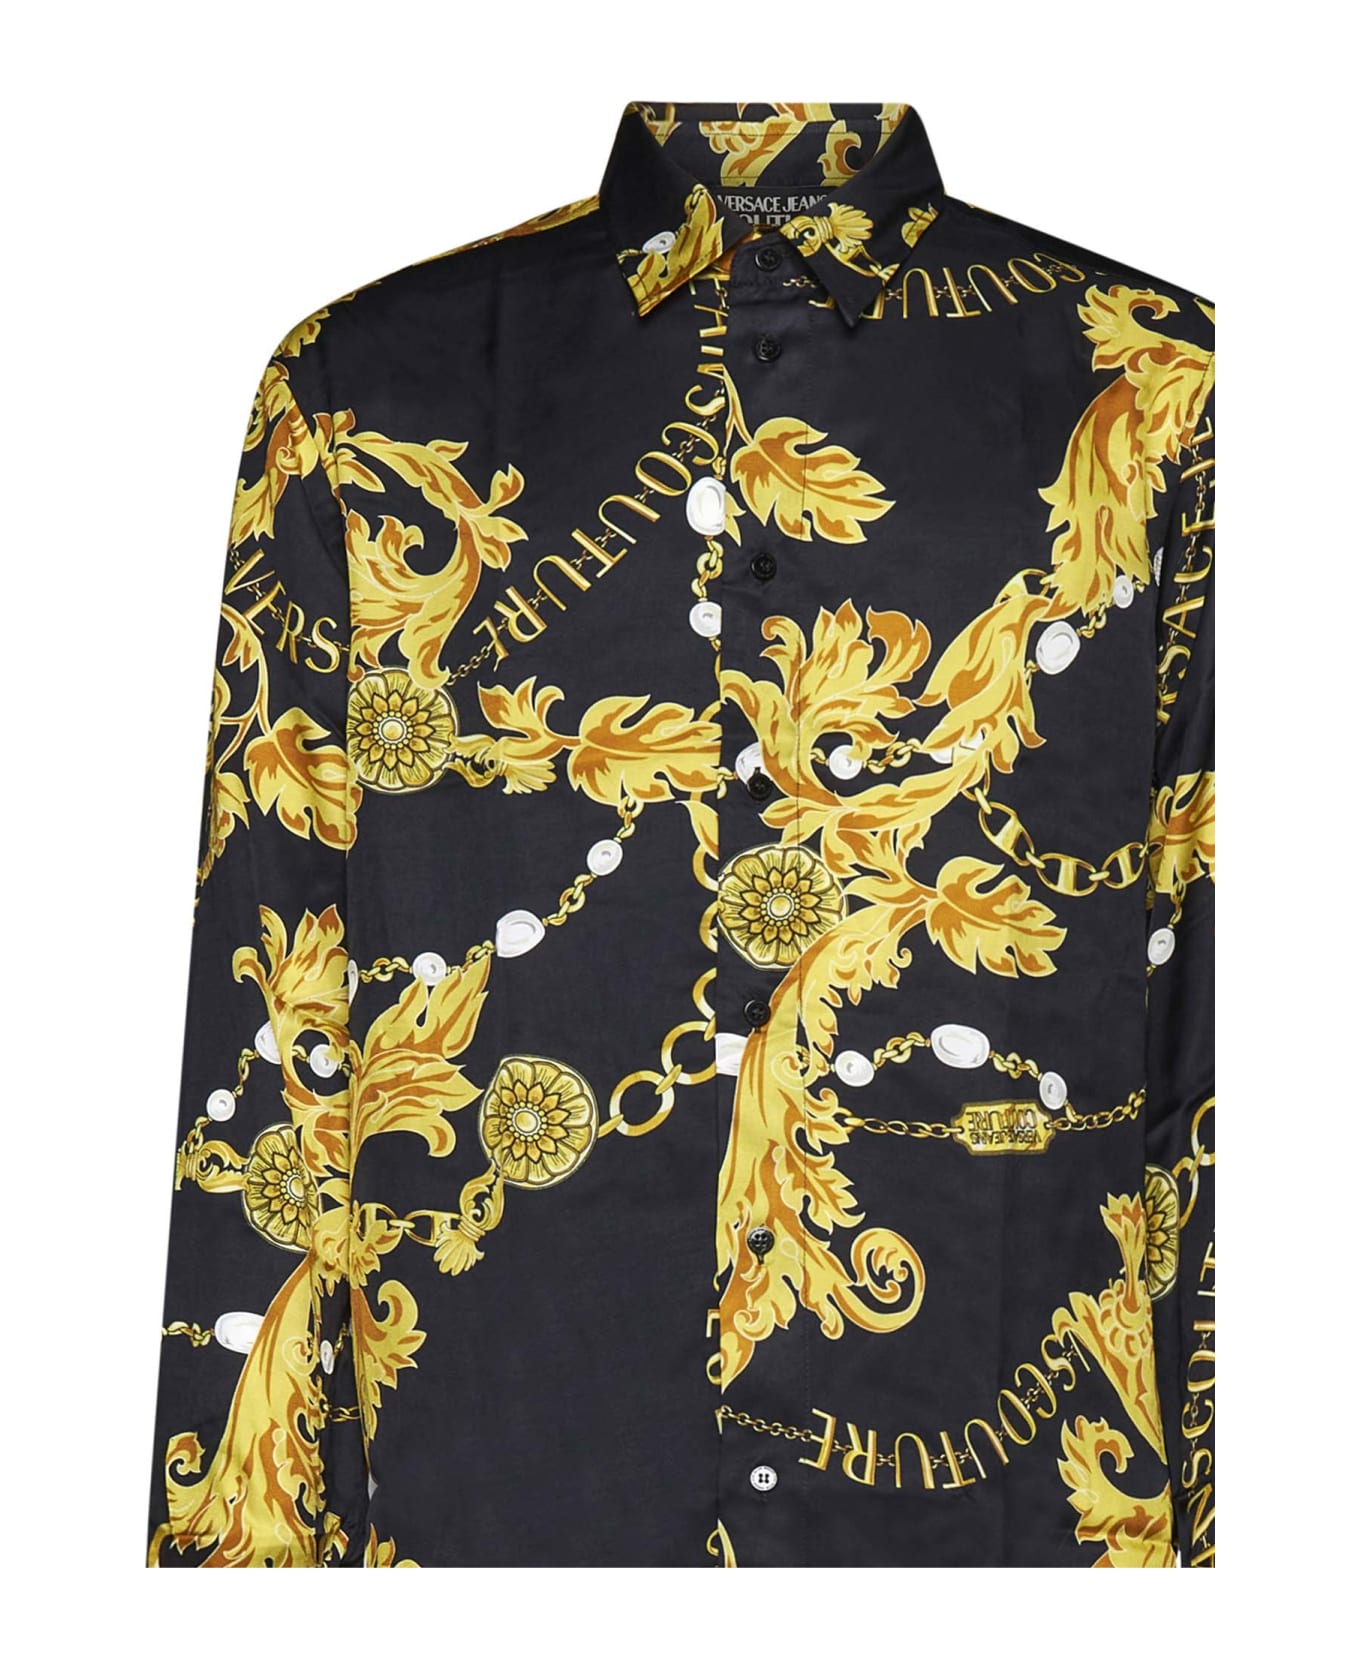 Versace Jeans Couture Shirt - Black Gold